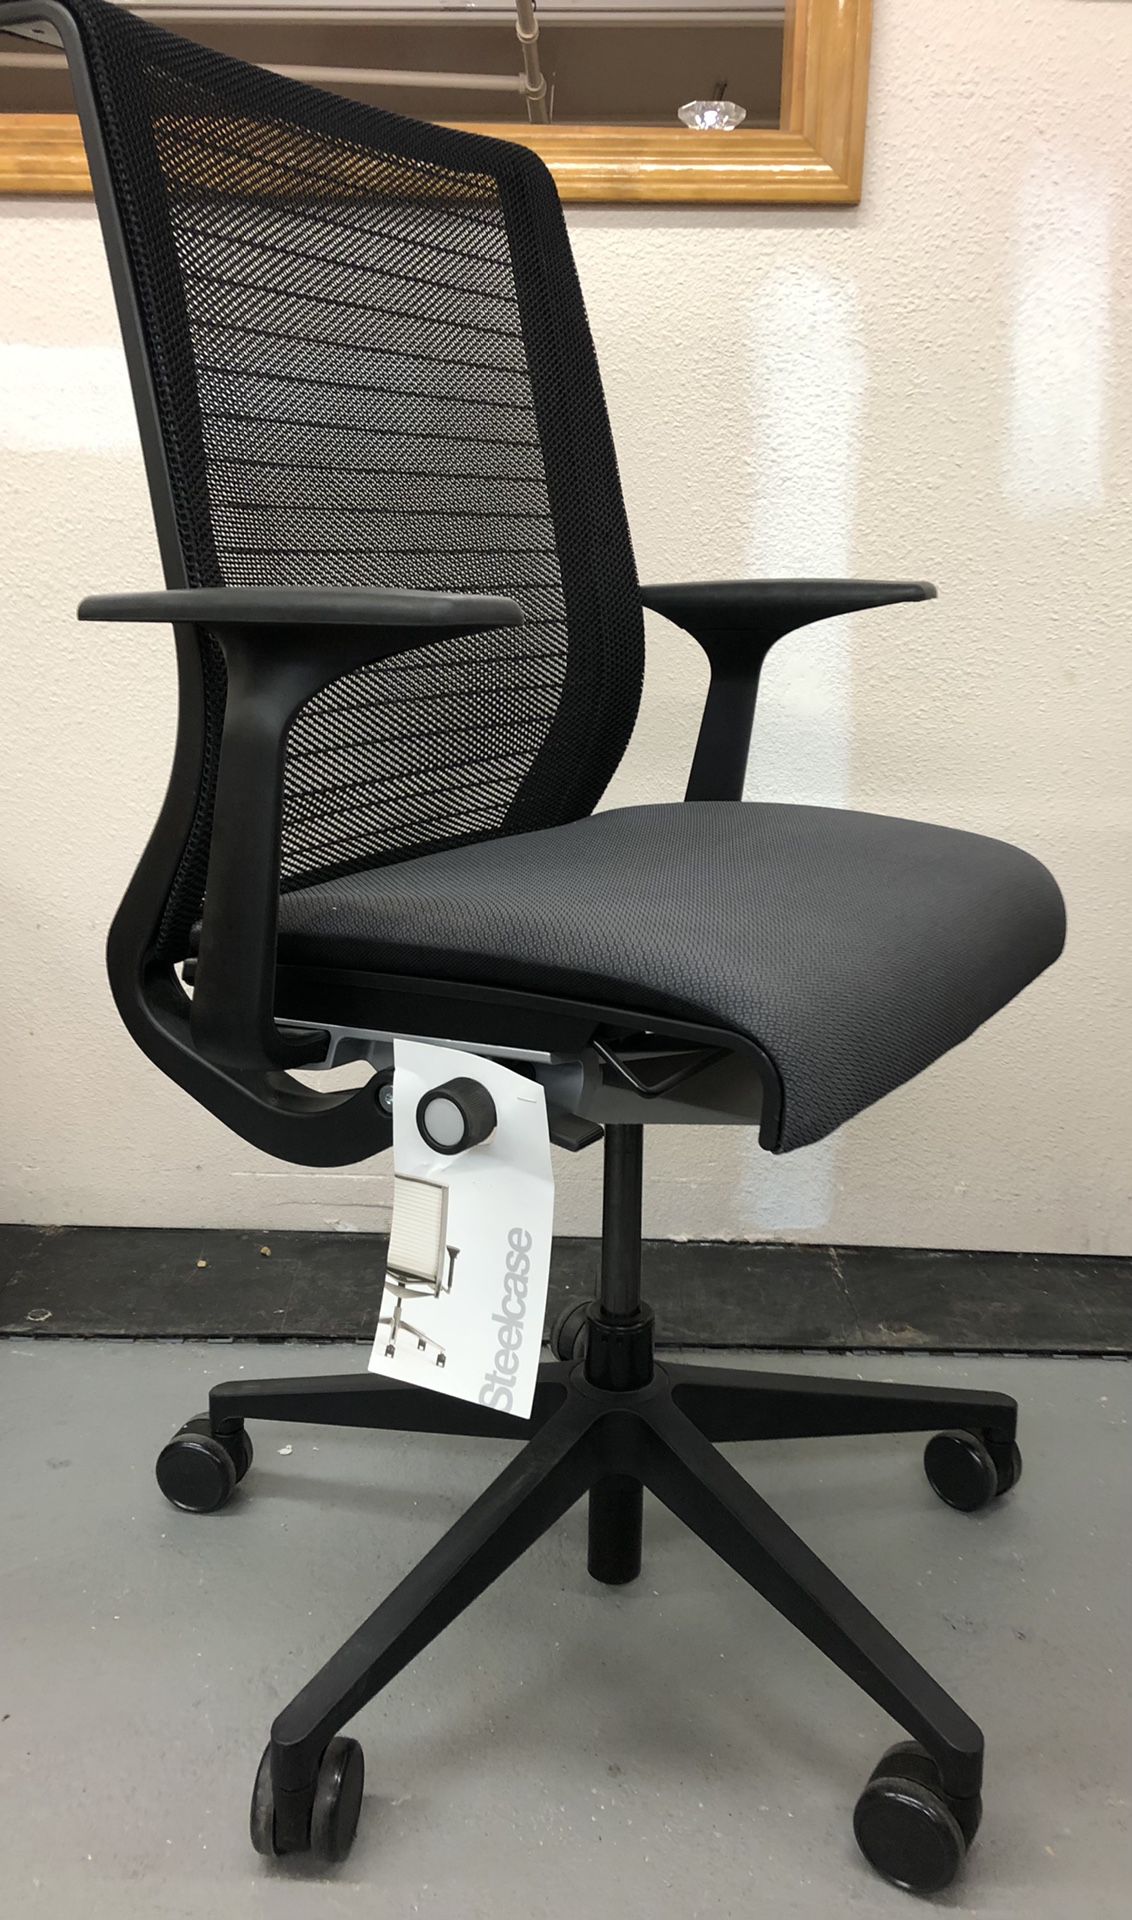 Steelcase Think Chair  Ergonomic Office Desk Chairs $125